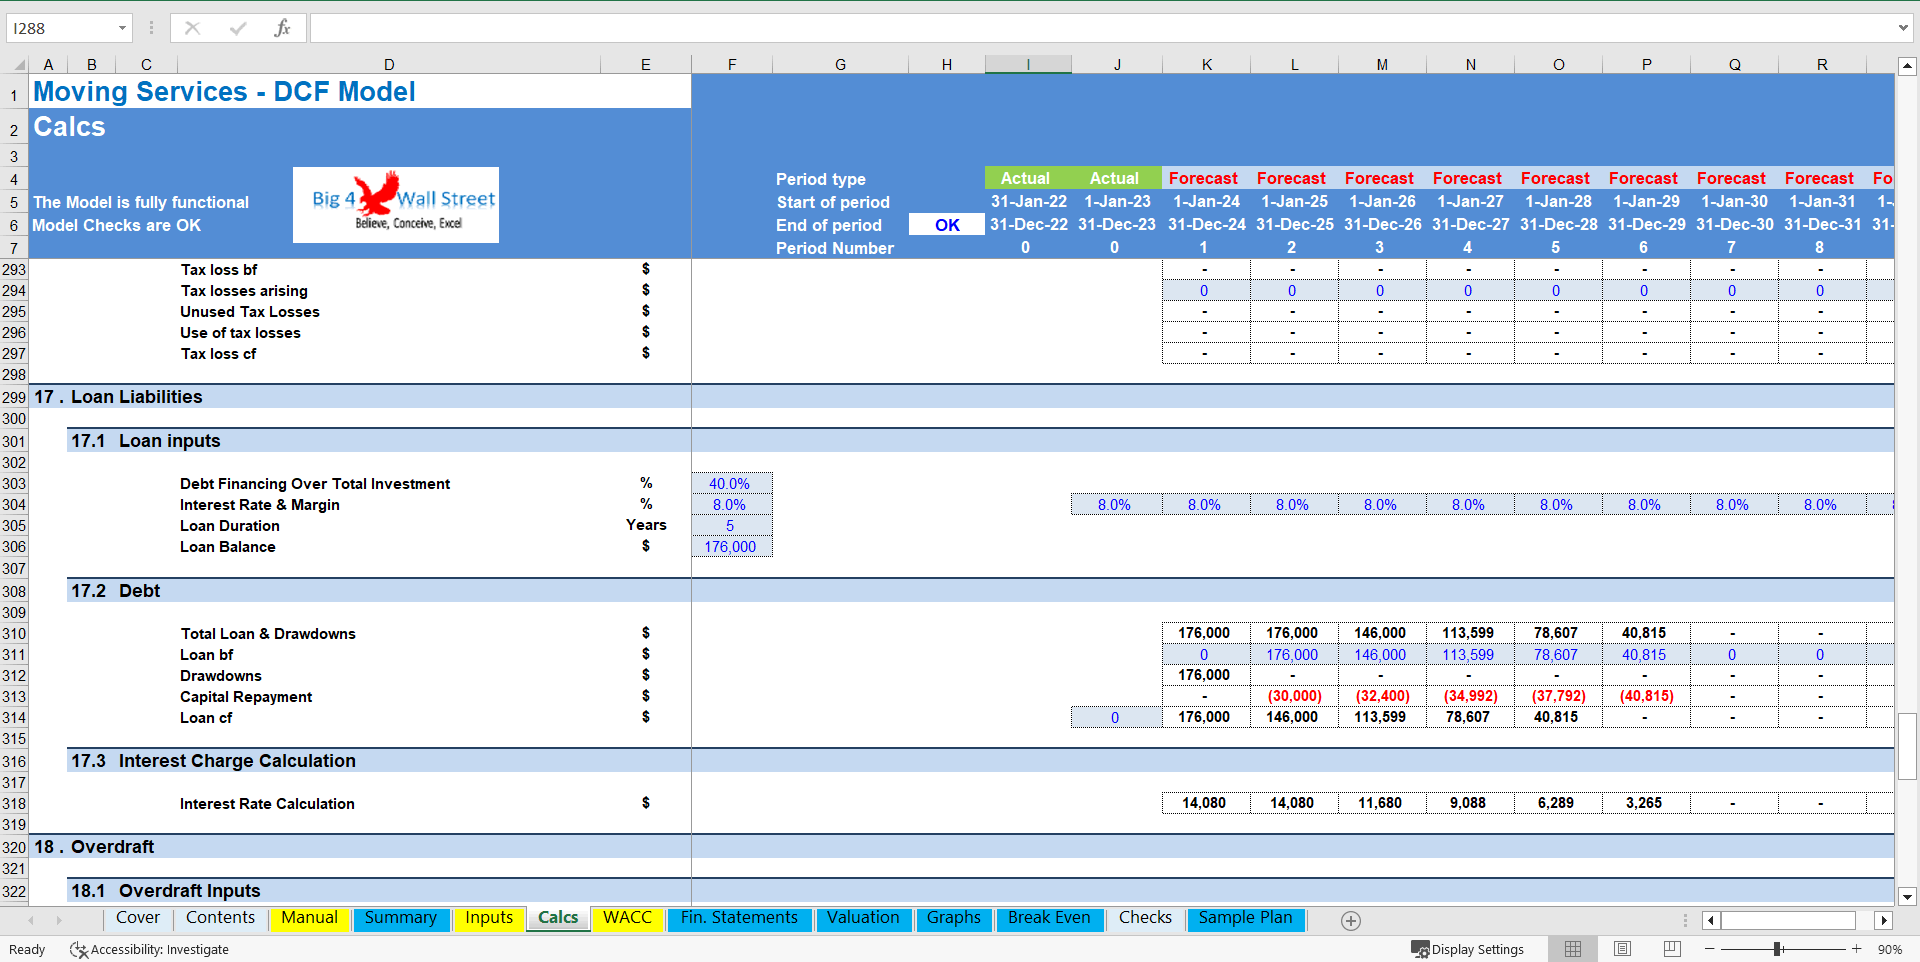 Moving Services Business Financial Model (10+ Year DCF Valuation) (Excel template (XLSX)) Preview Image